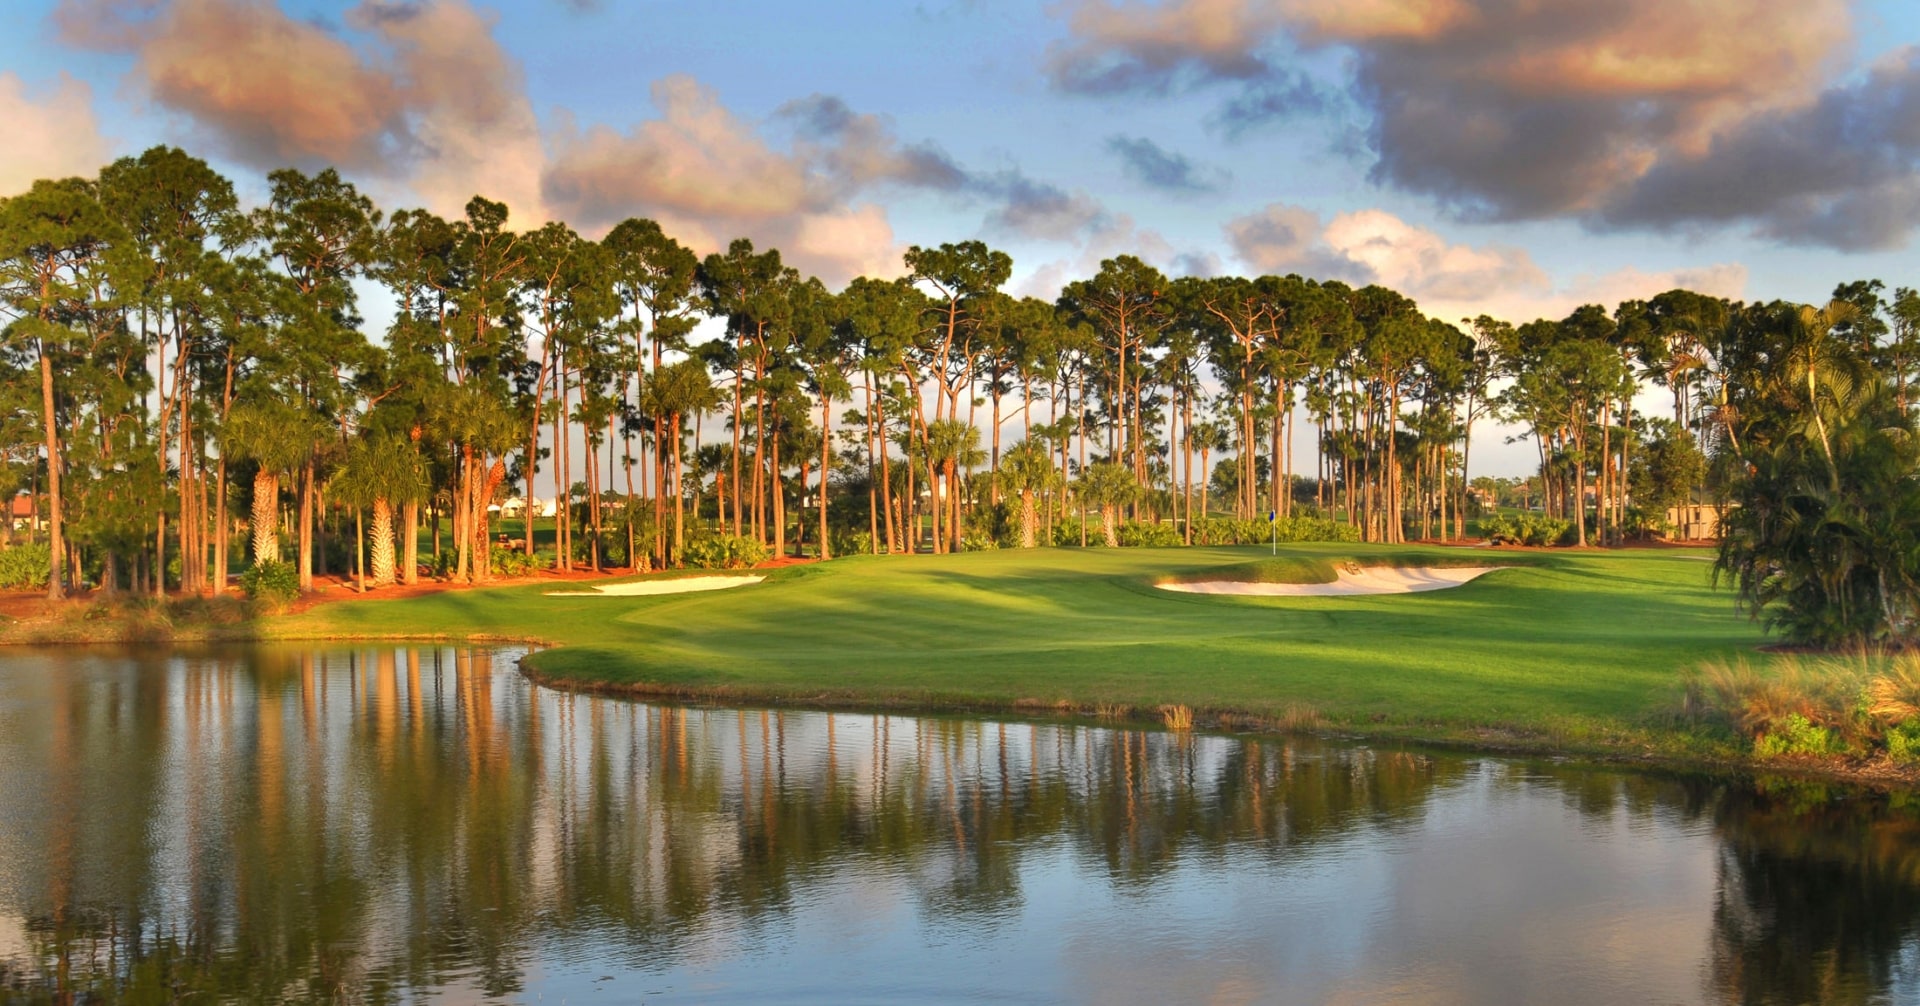 PGA National Resort Announces First Annual ‘Hole in One Challenge’